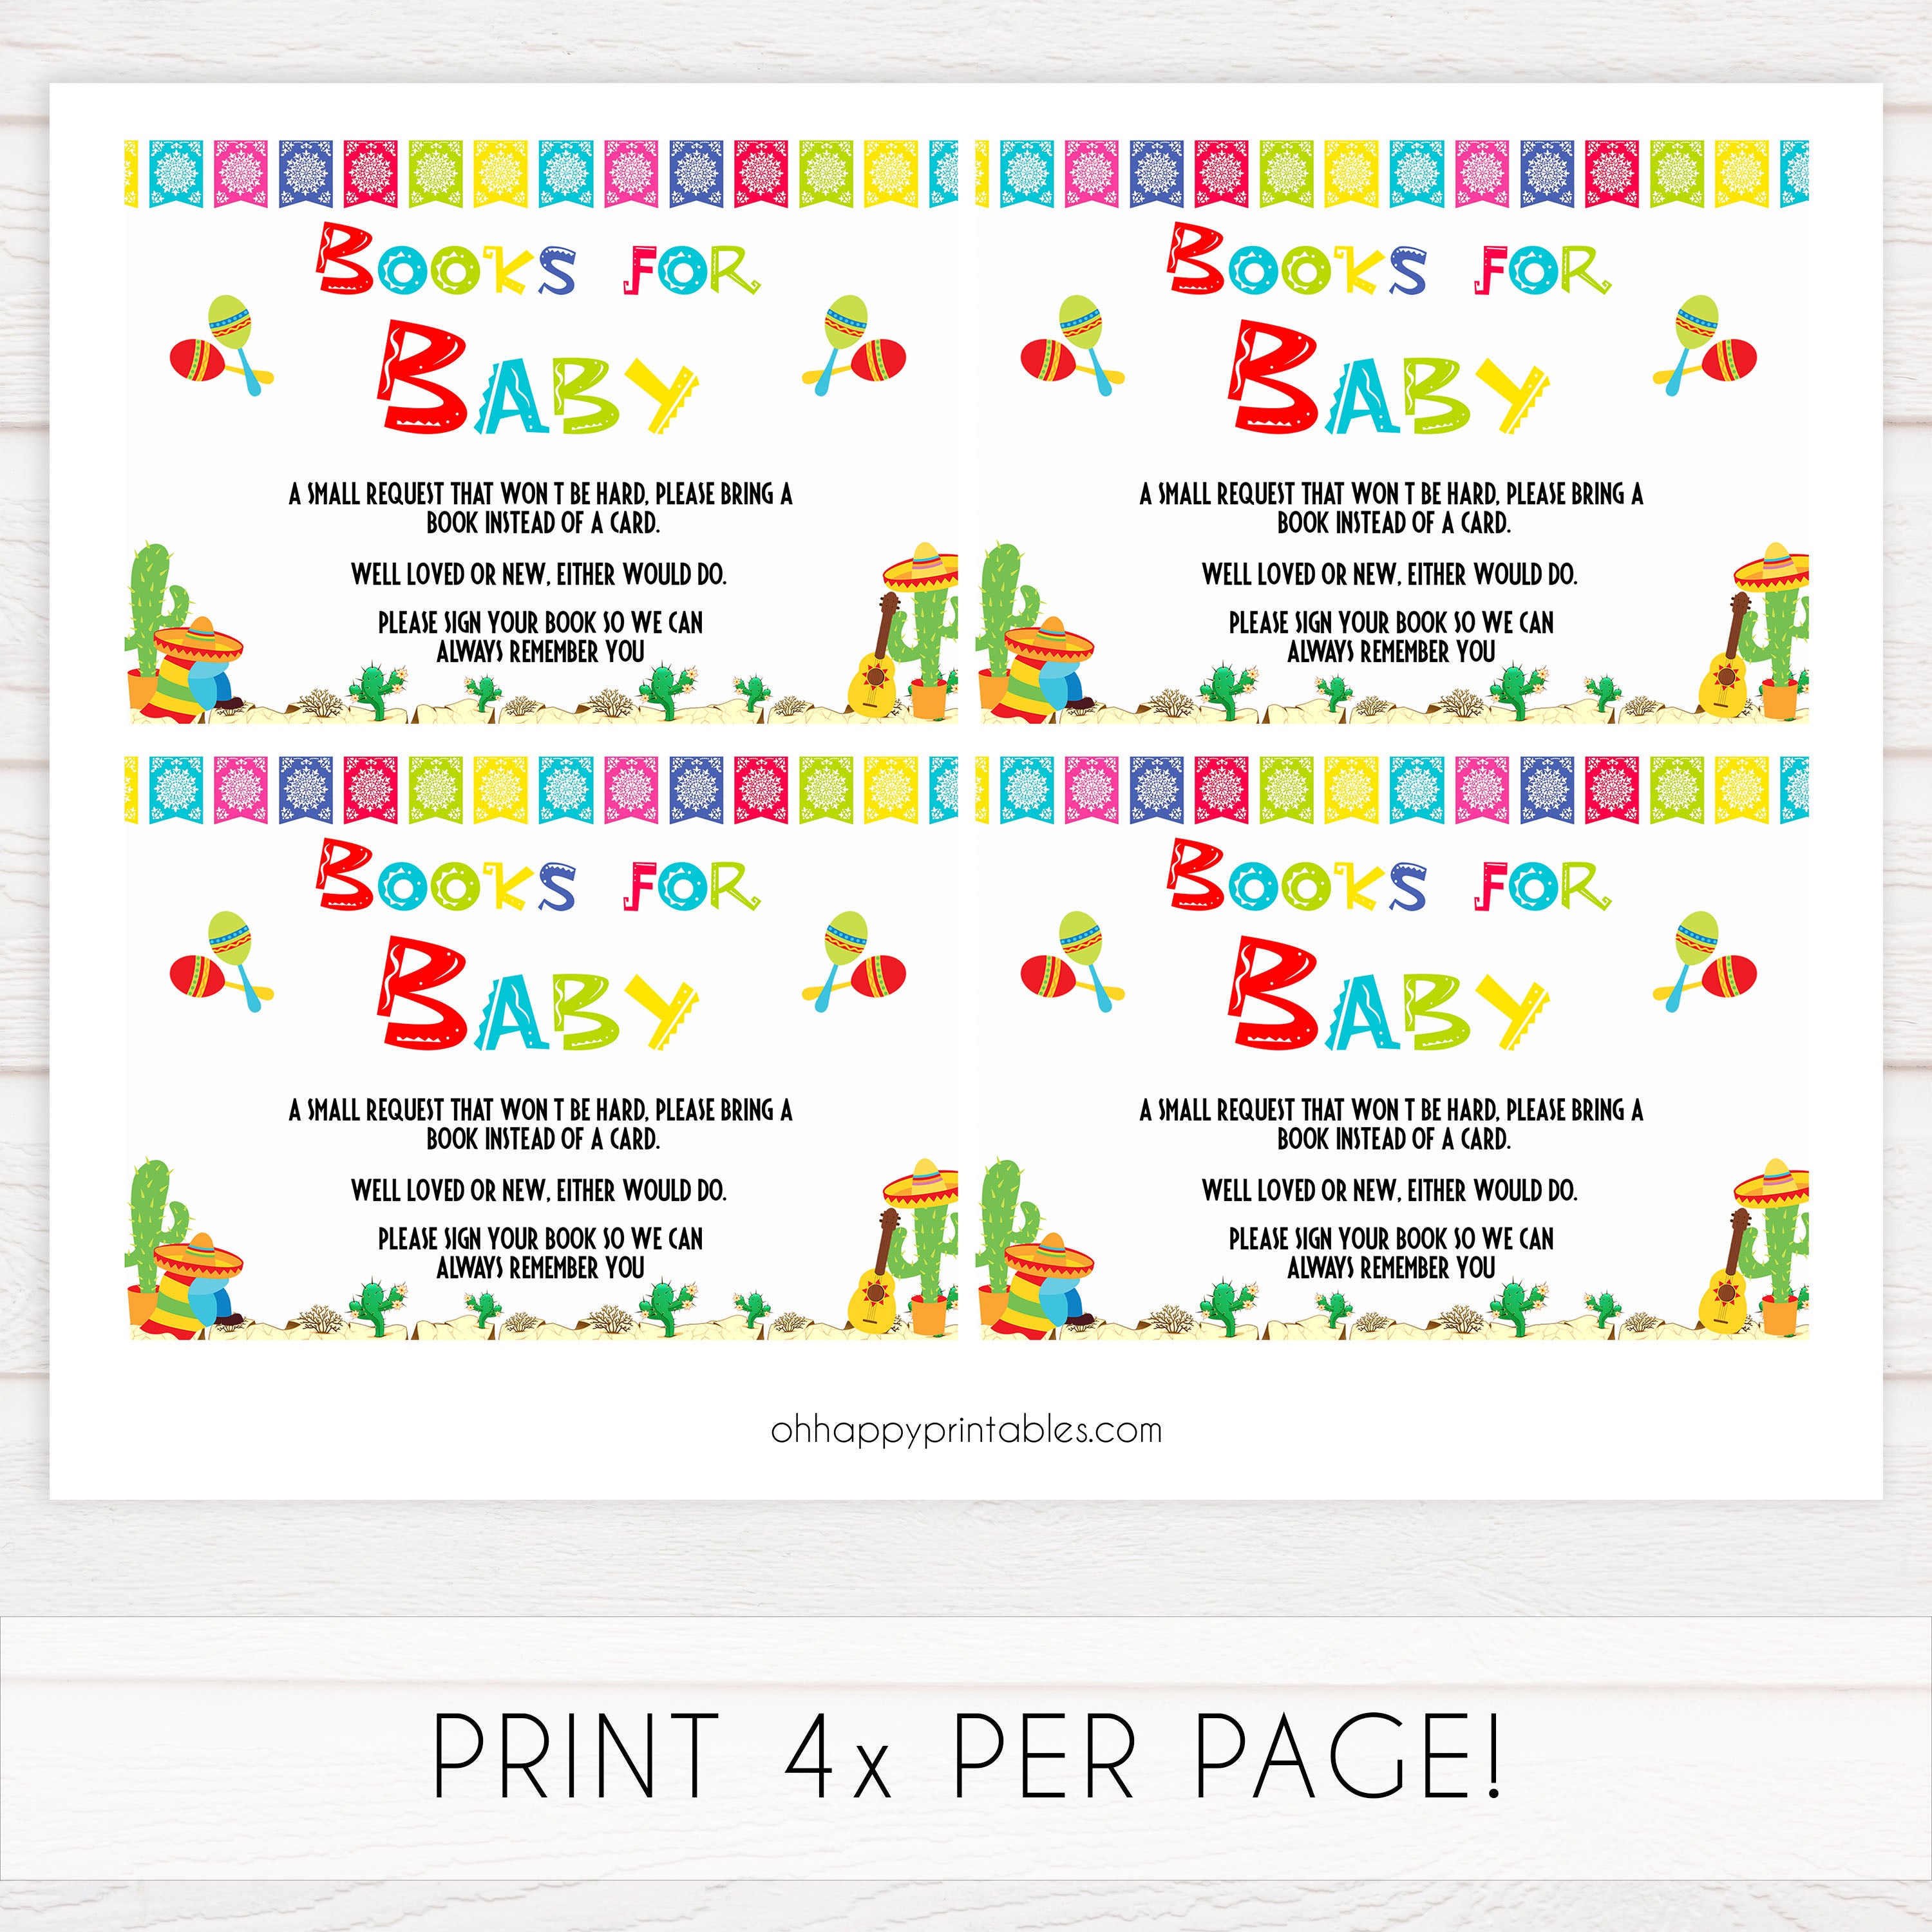 bring a book, books for baby, Printable baby shower games, Mexican fiesta fun baby games, baby shower games, fun baby shower ideas, top baby shower ideas, fiesta shower baby shower, fiesta baby shower ideas